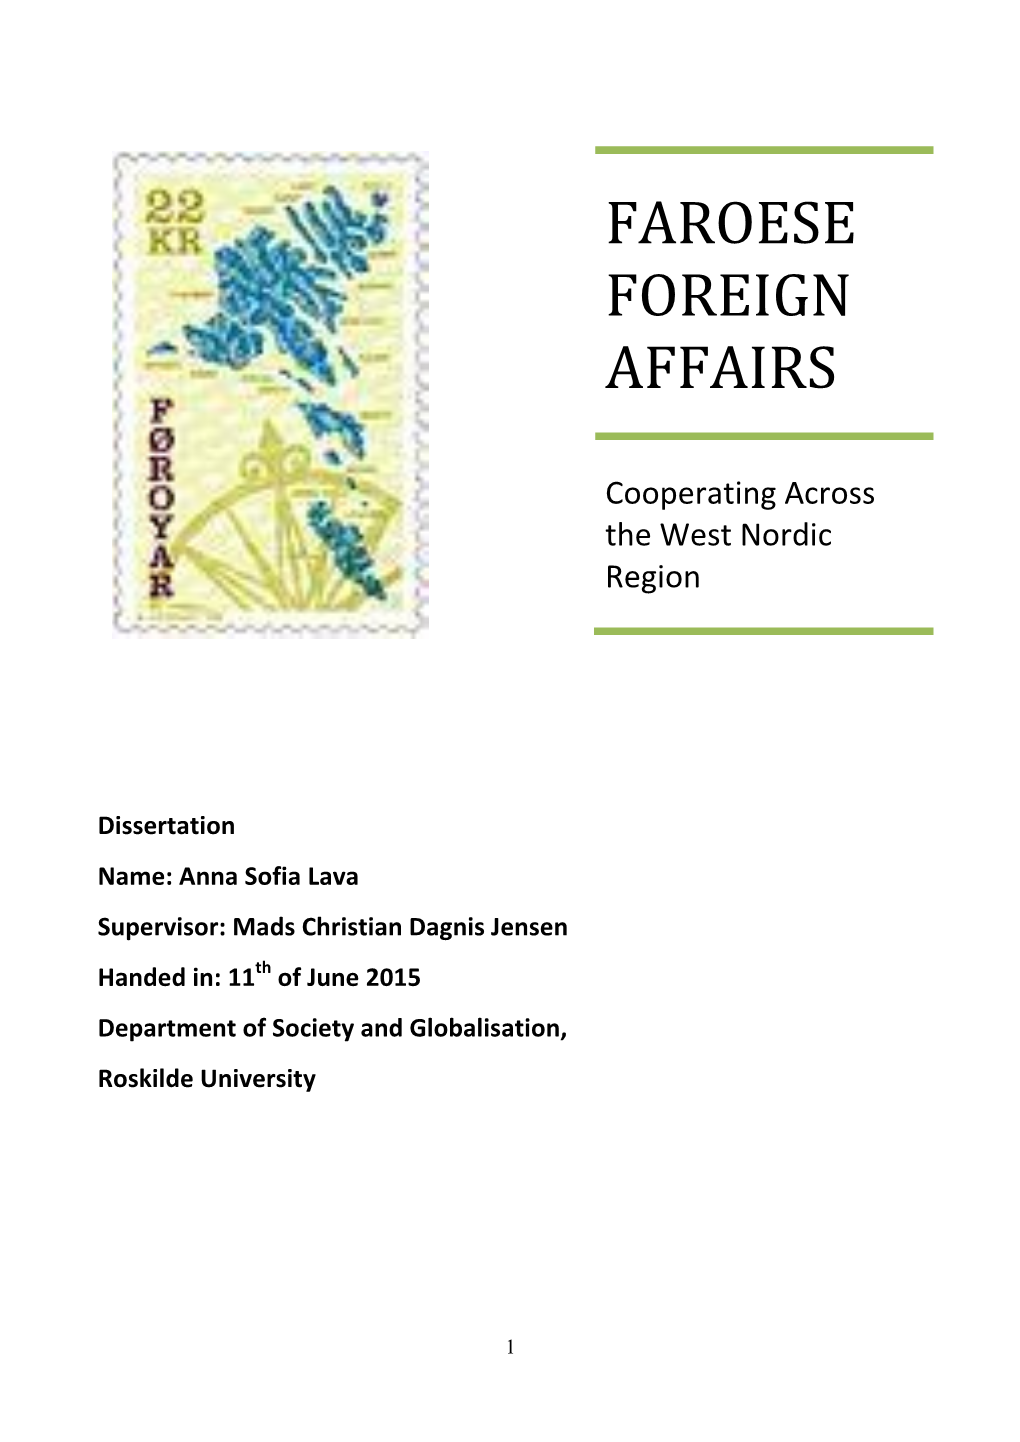 FAROESE FOREIGN AFFAIRS – Cooperating Across the West Nordic Region